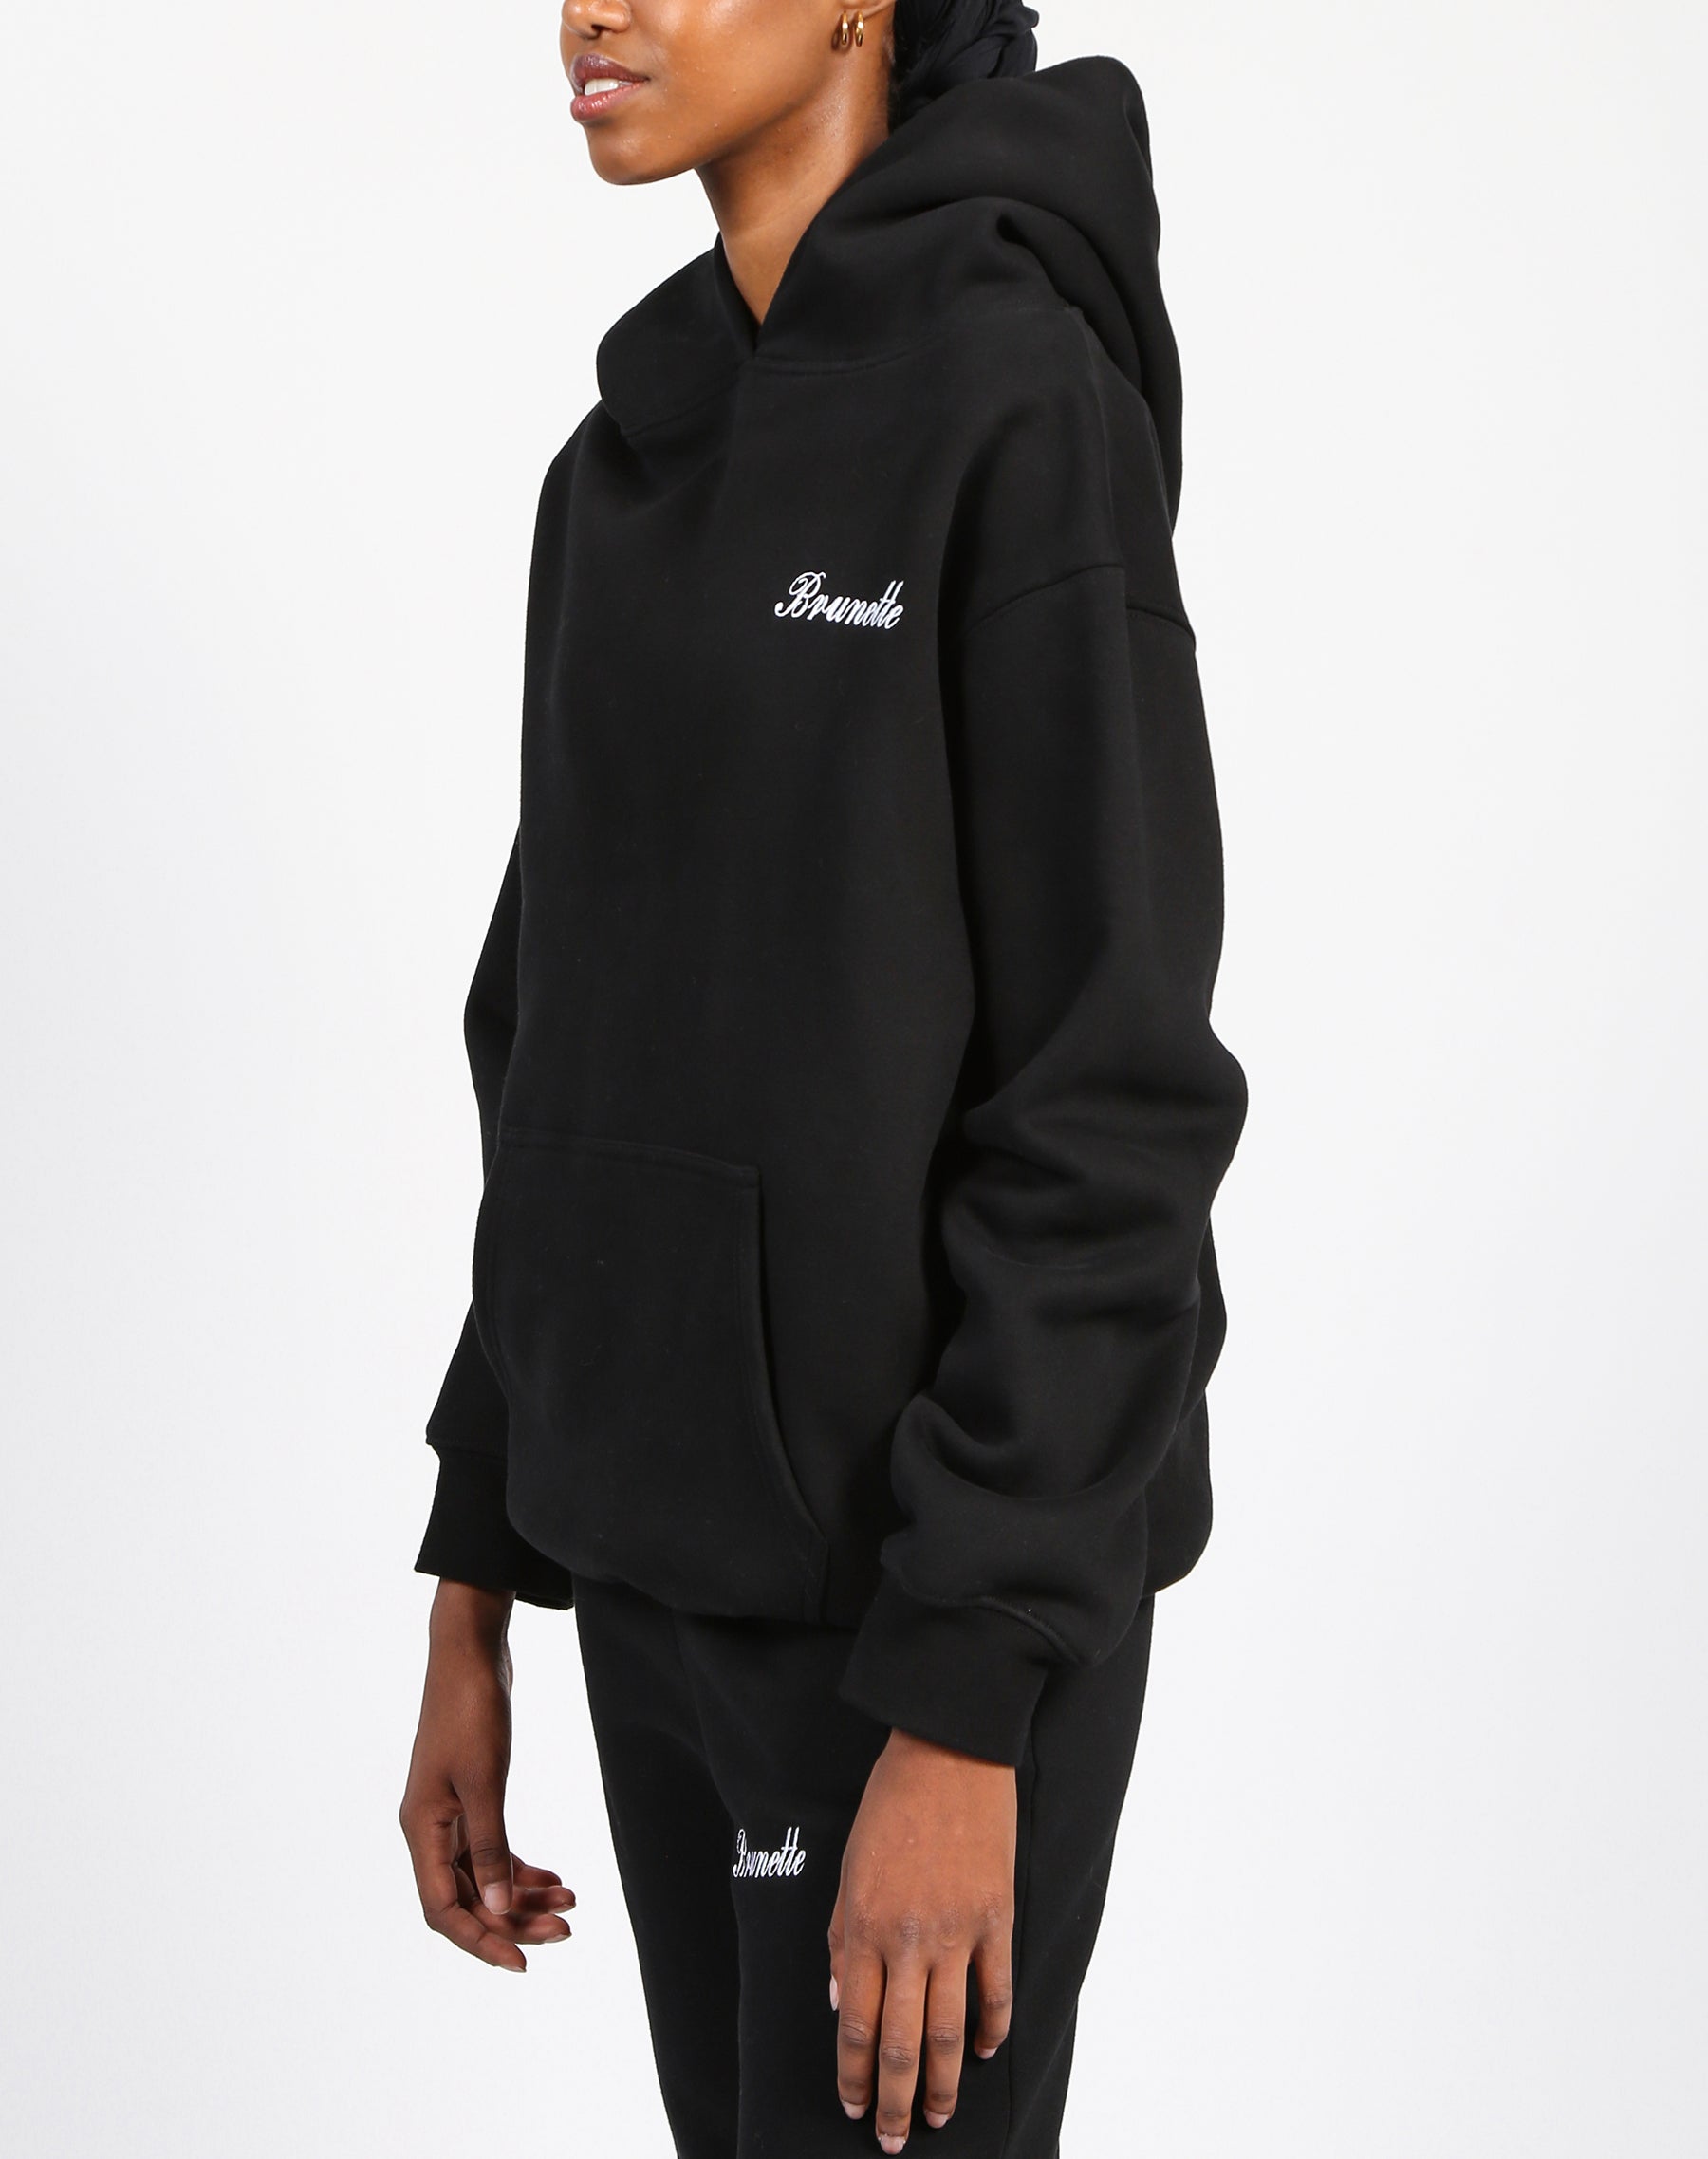 The "BRUNETTE" Embroidered Classic Hoodie | Black